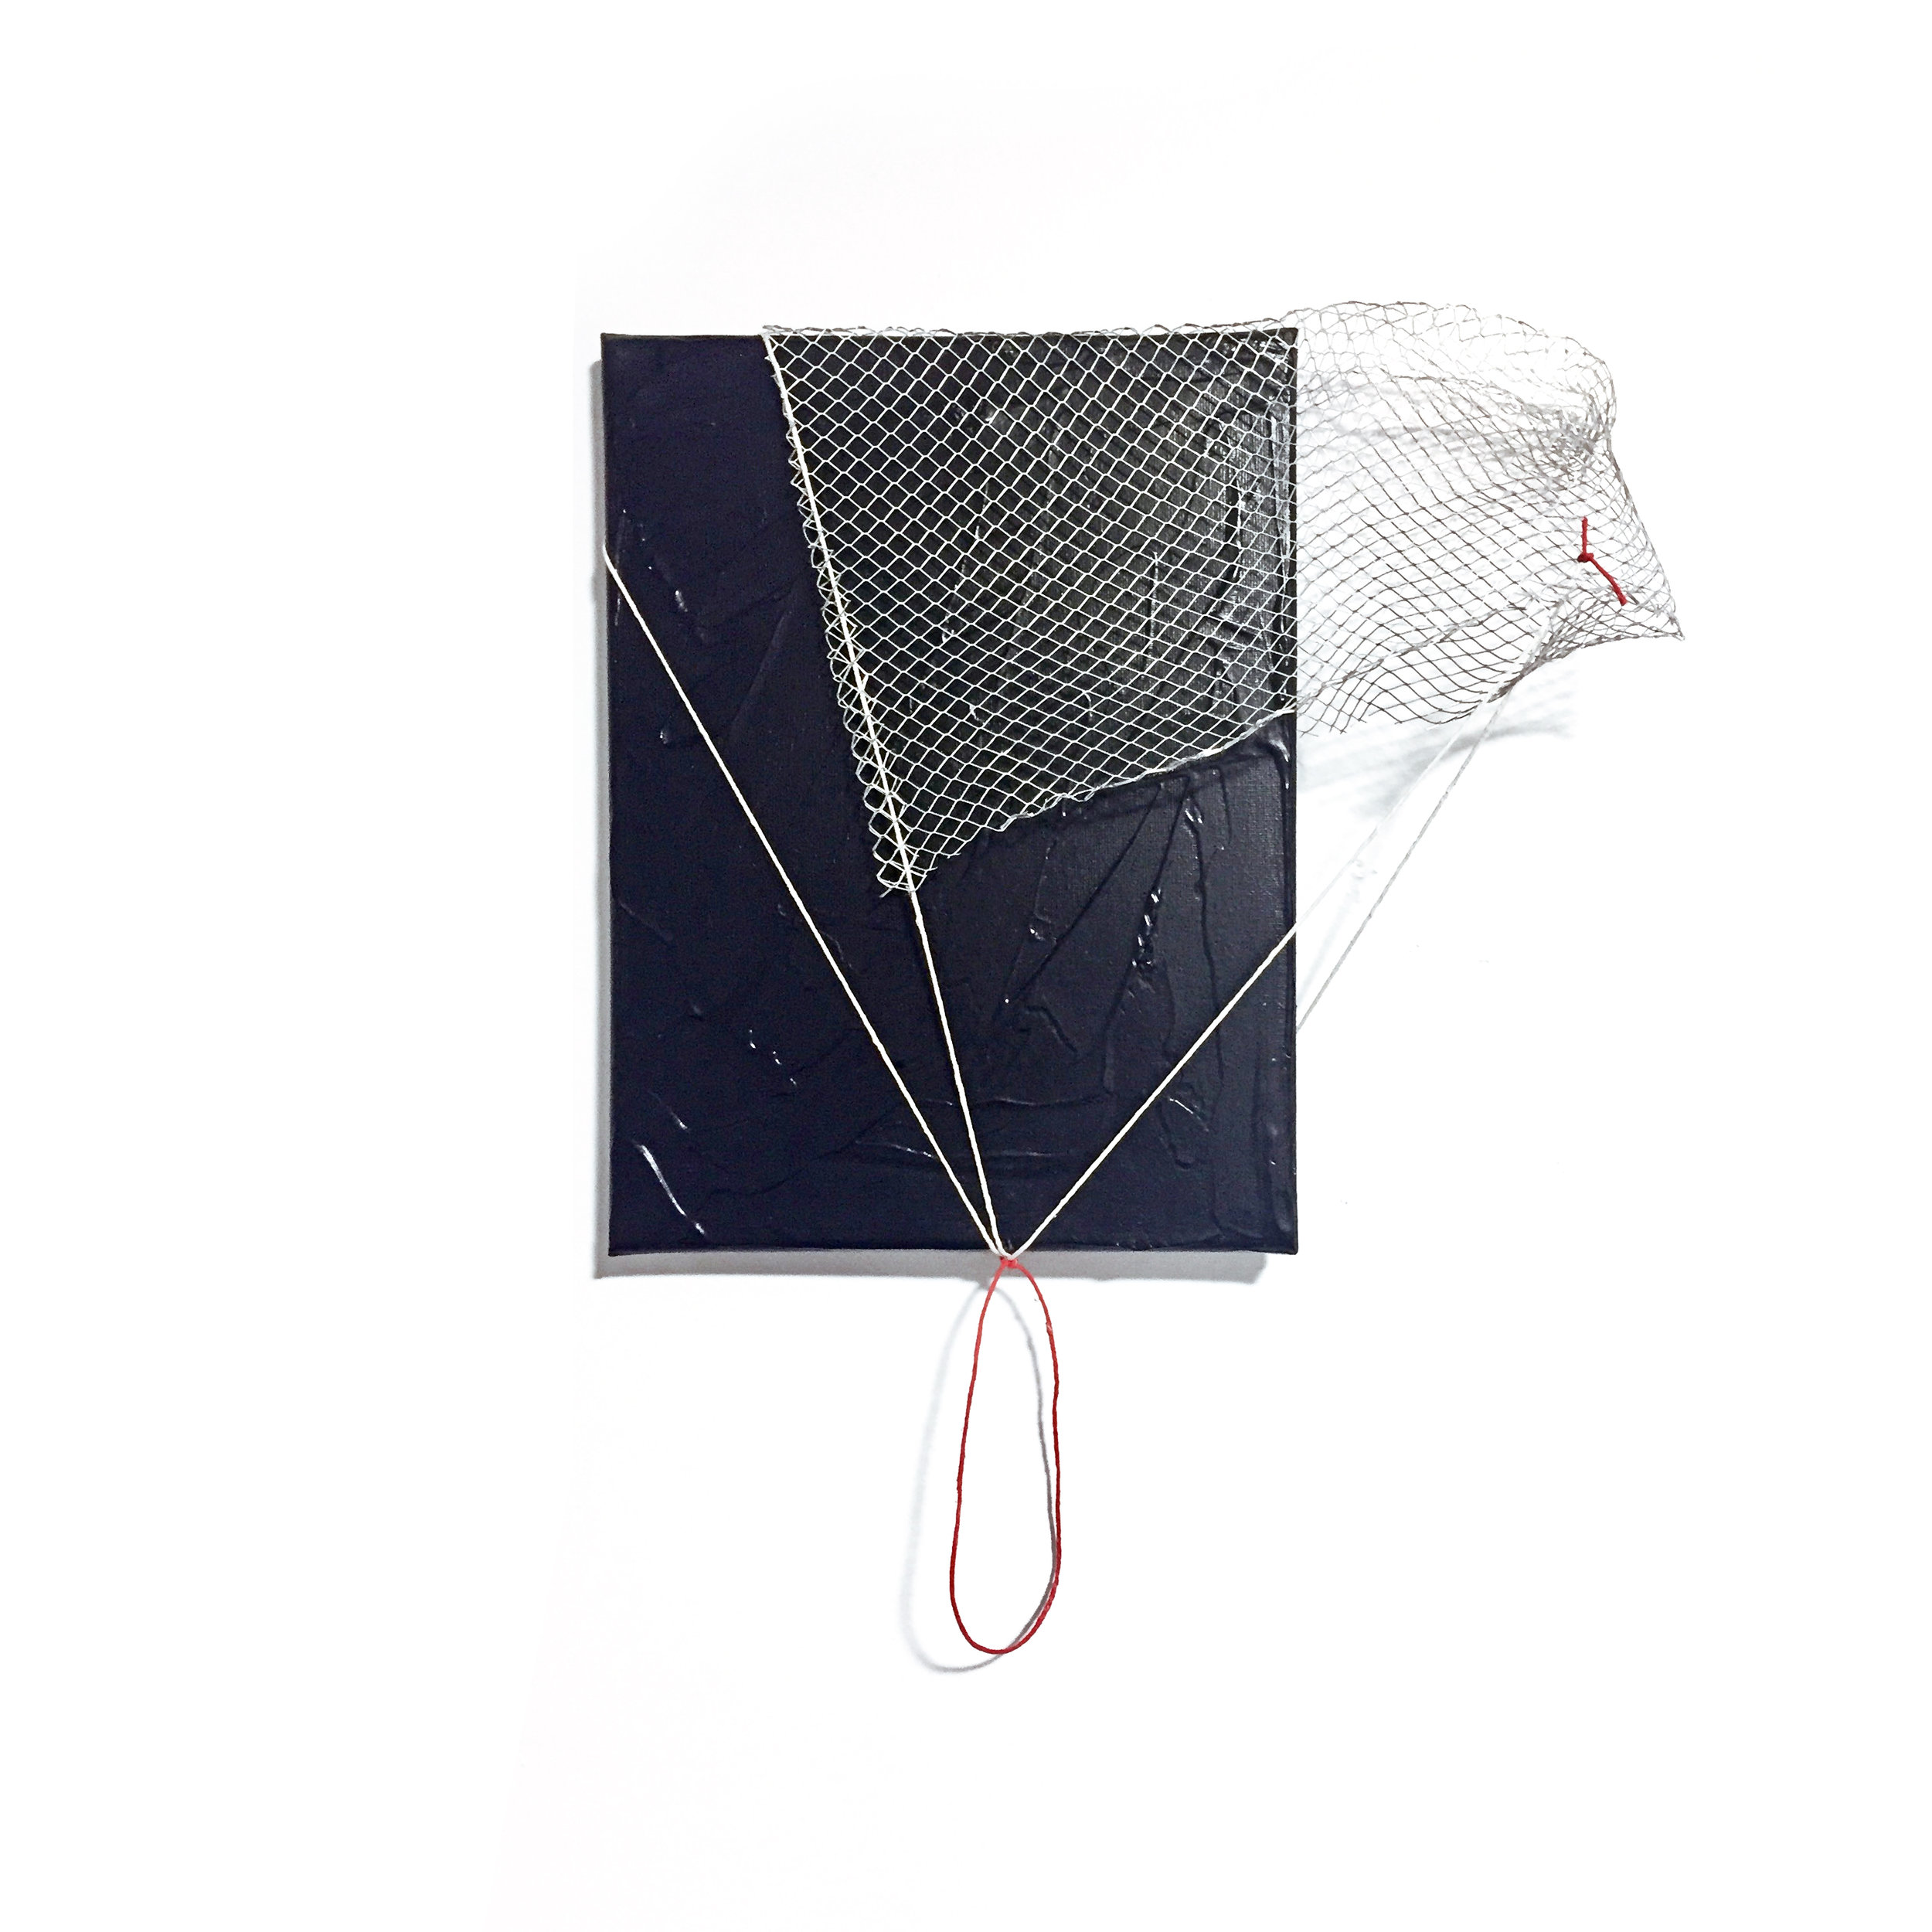 Untitled (Black, Red and White), 2018, acrylic, string and wire mesh on canvas, 18" x 14" x 4"